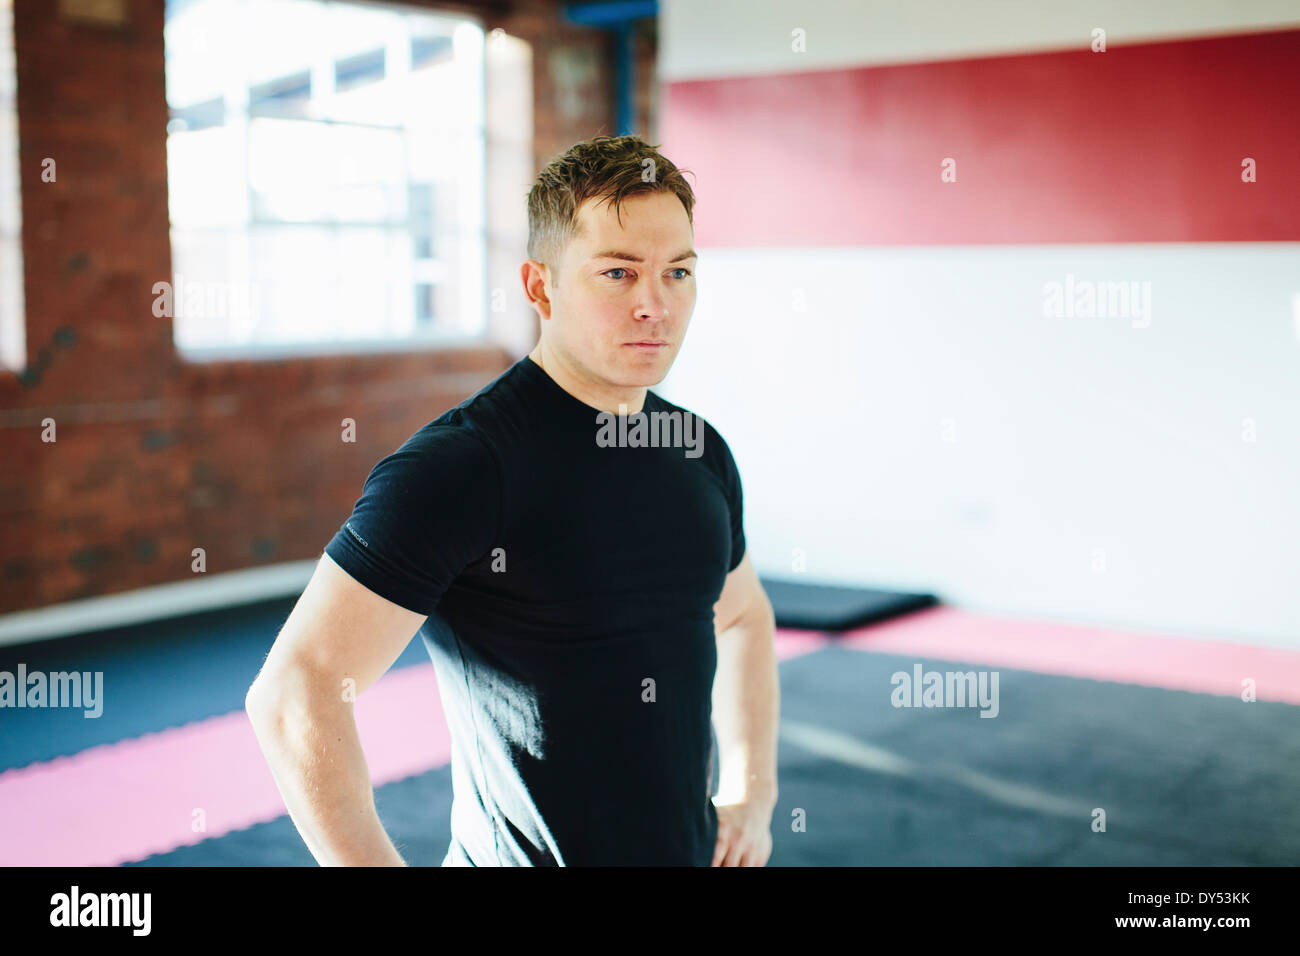 Man standing in gym with hands on hips Stock Photo